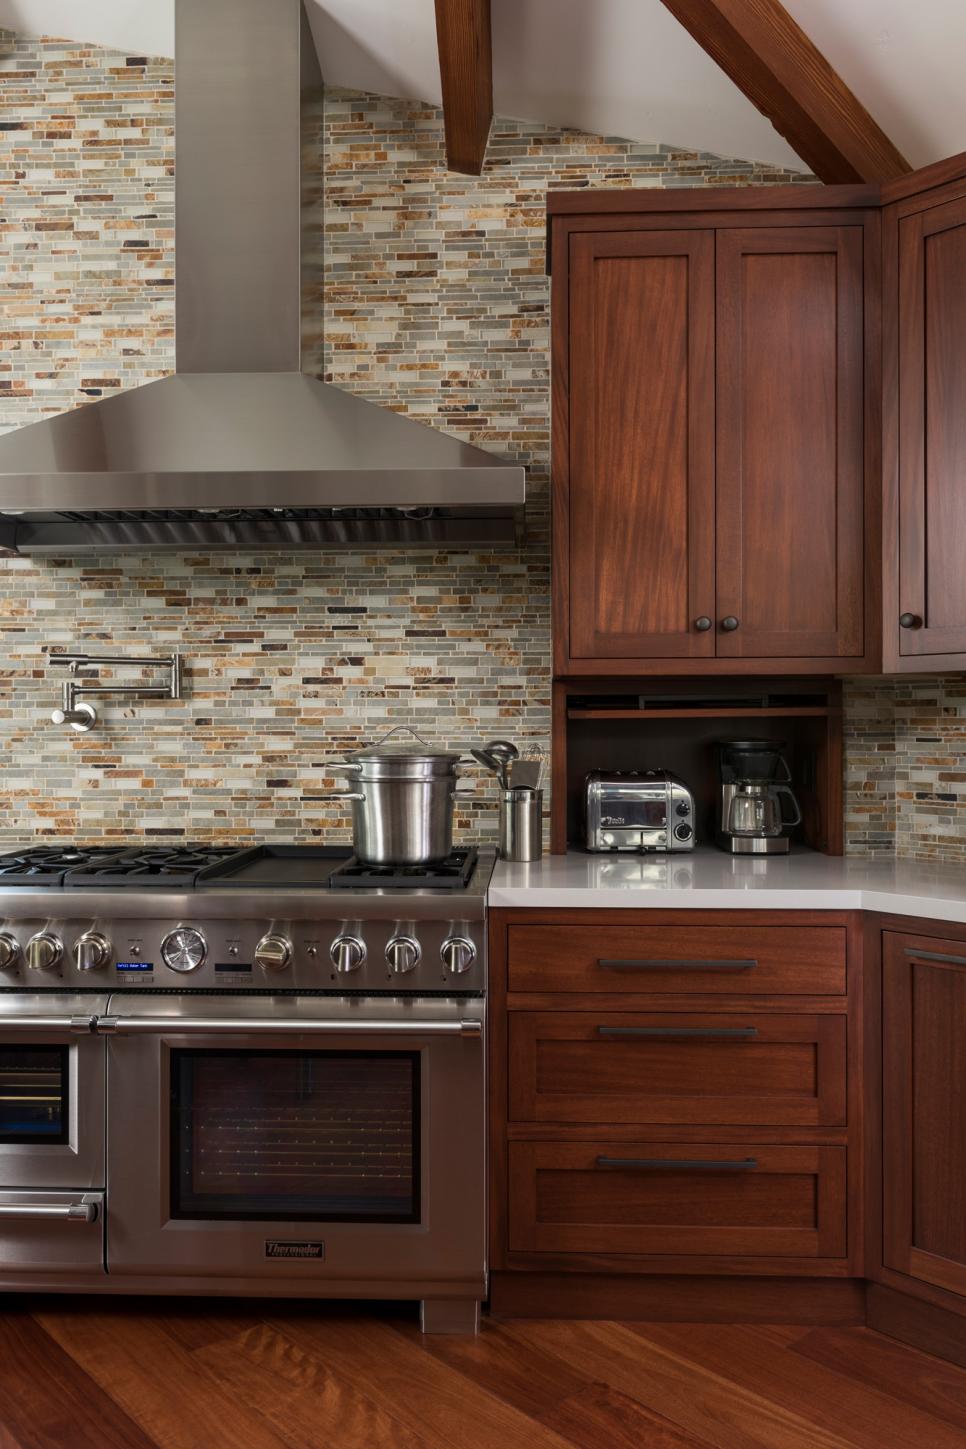 appliance cabinets kitchens Peel n stick instant vinly counter top faux
fake granite film overlay